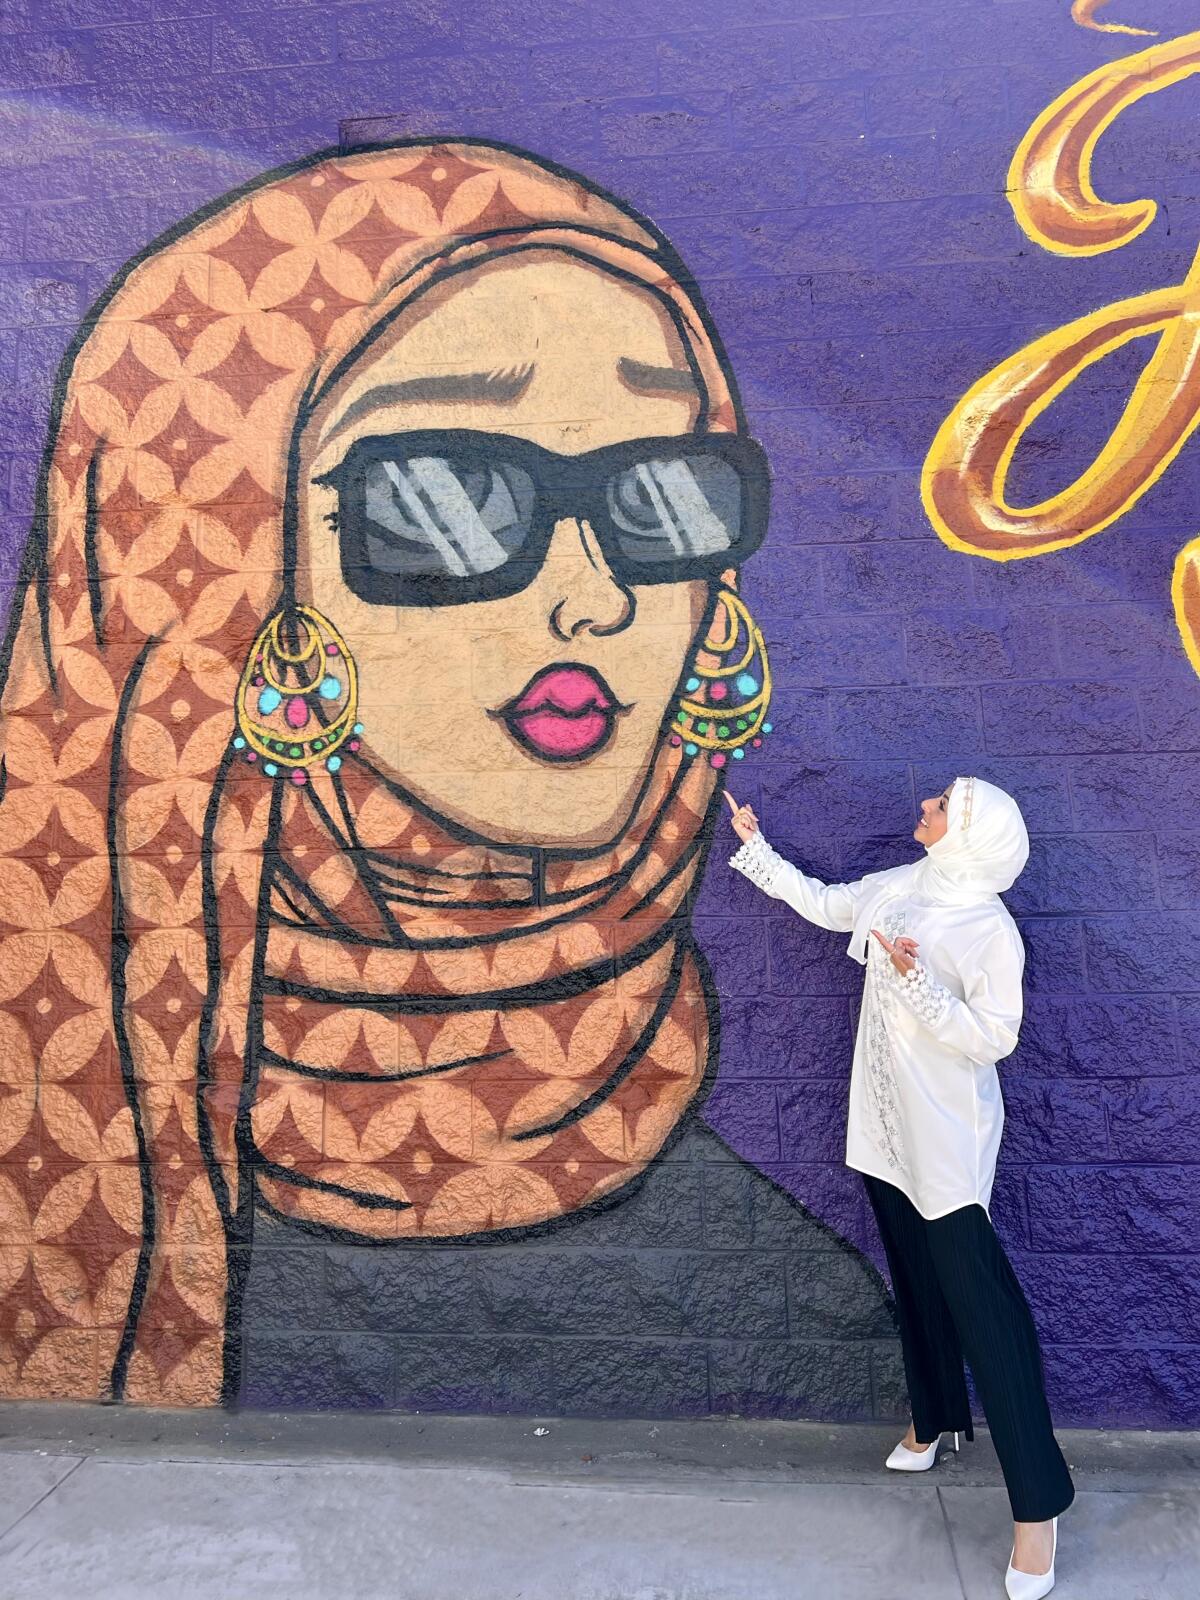 Doaa Zaher poses next to one of the new "Hijabi Queens" murals in Anaheim's Little Arabia District.